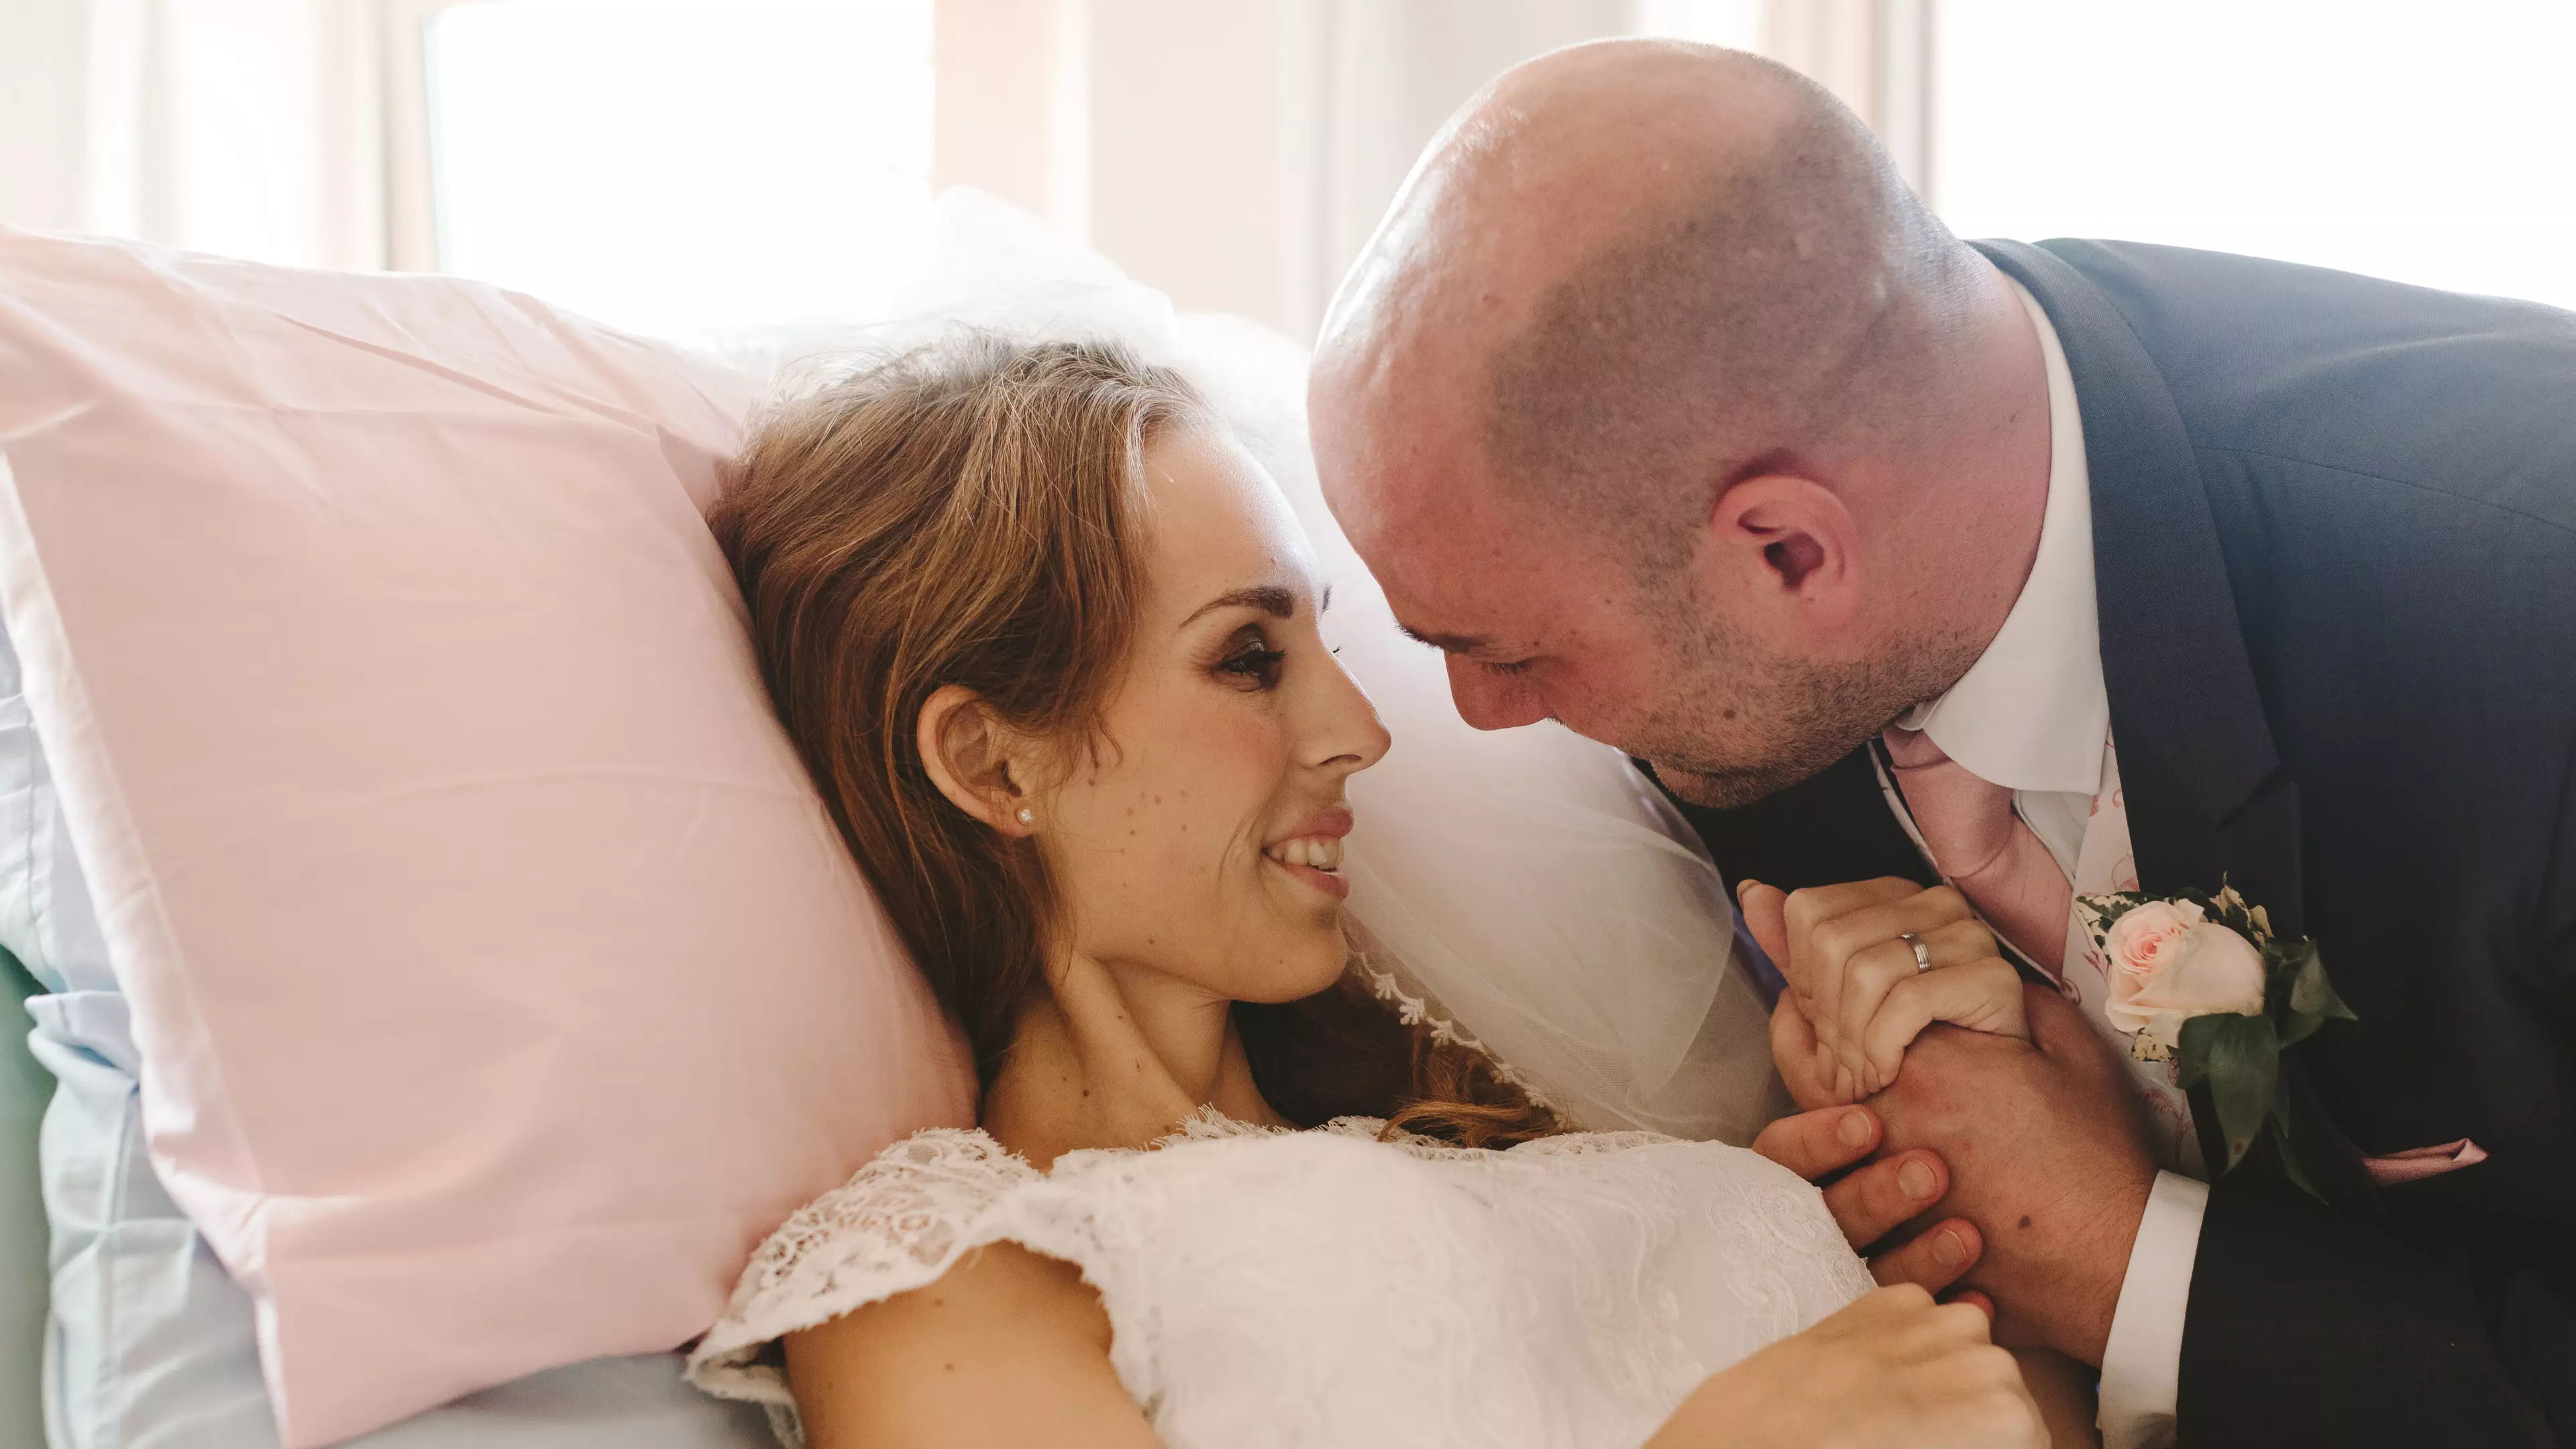 Moving Photos Of Bride Who Got Married To Devoted Husband From Hospice Bed